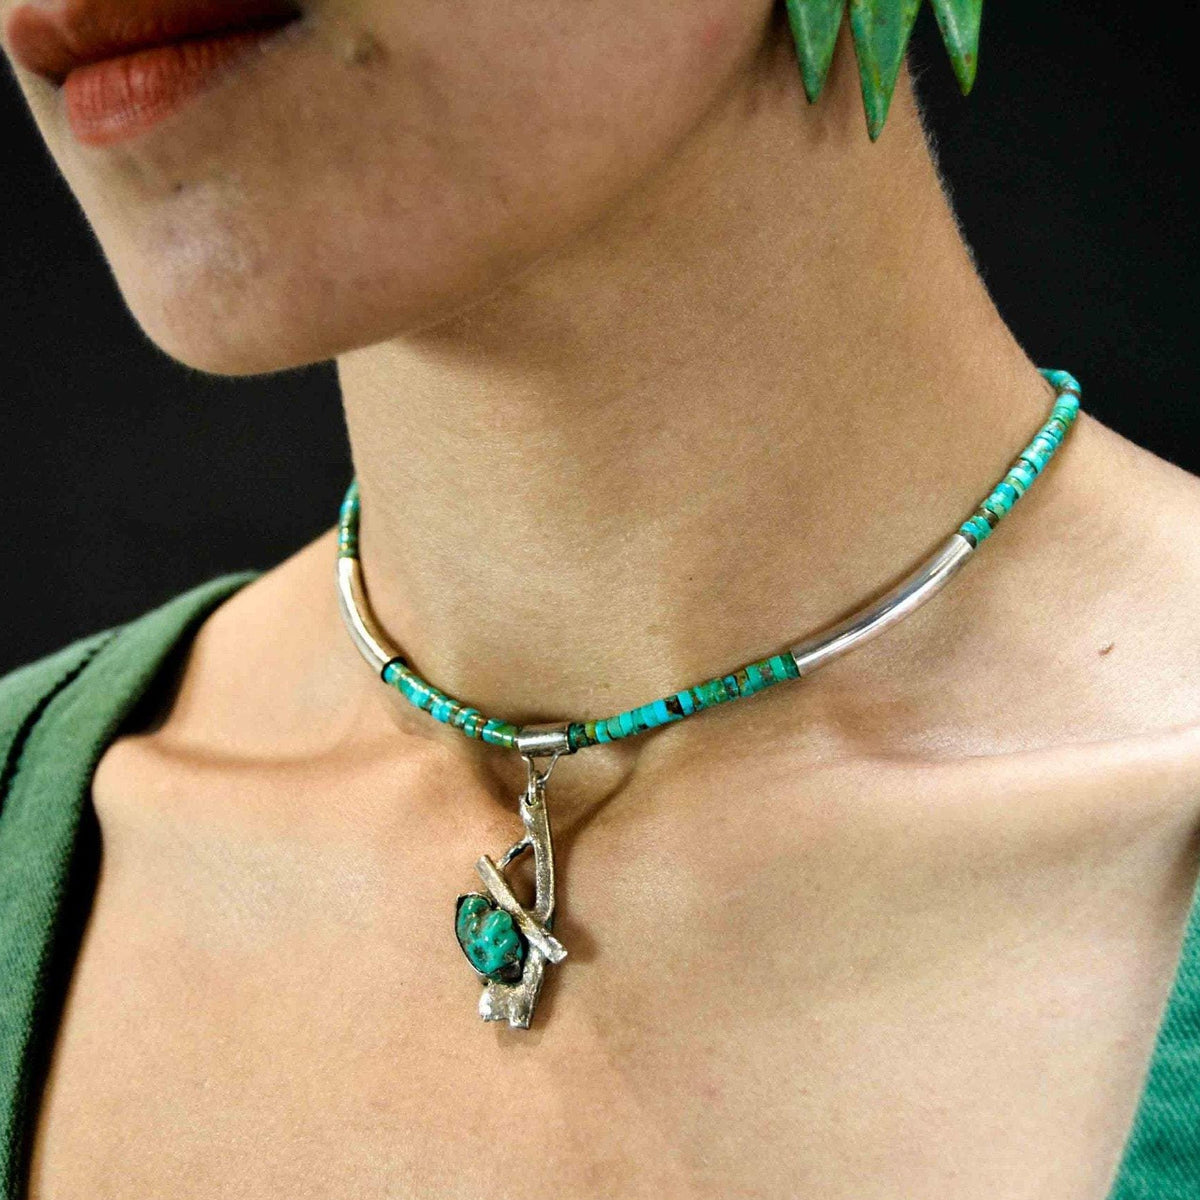 Turquoise fantasy choker with silver parts